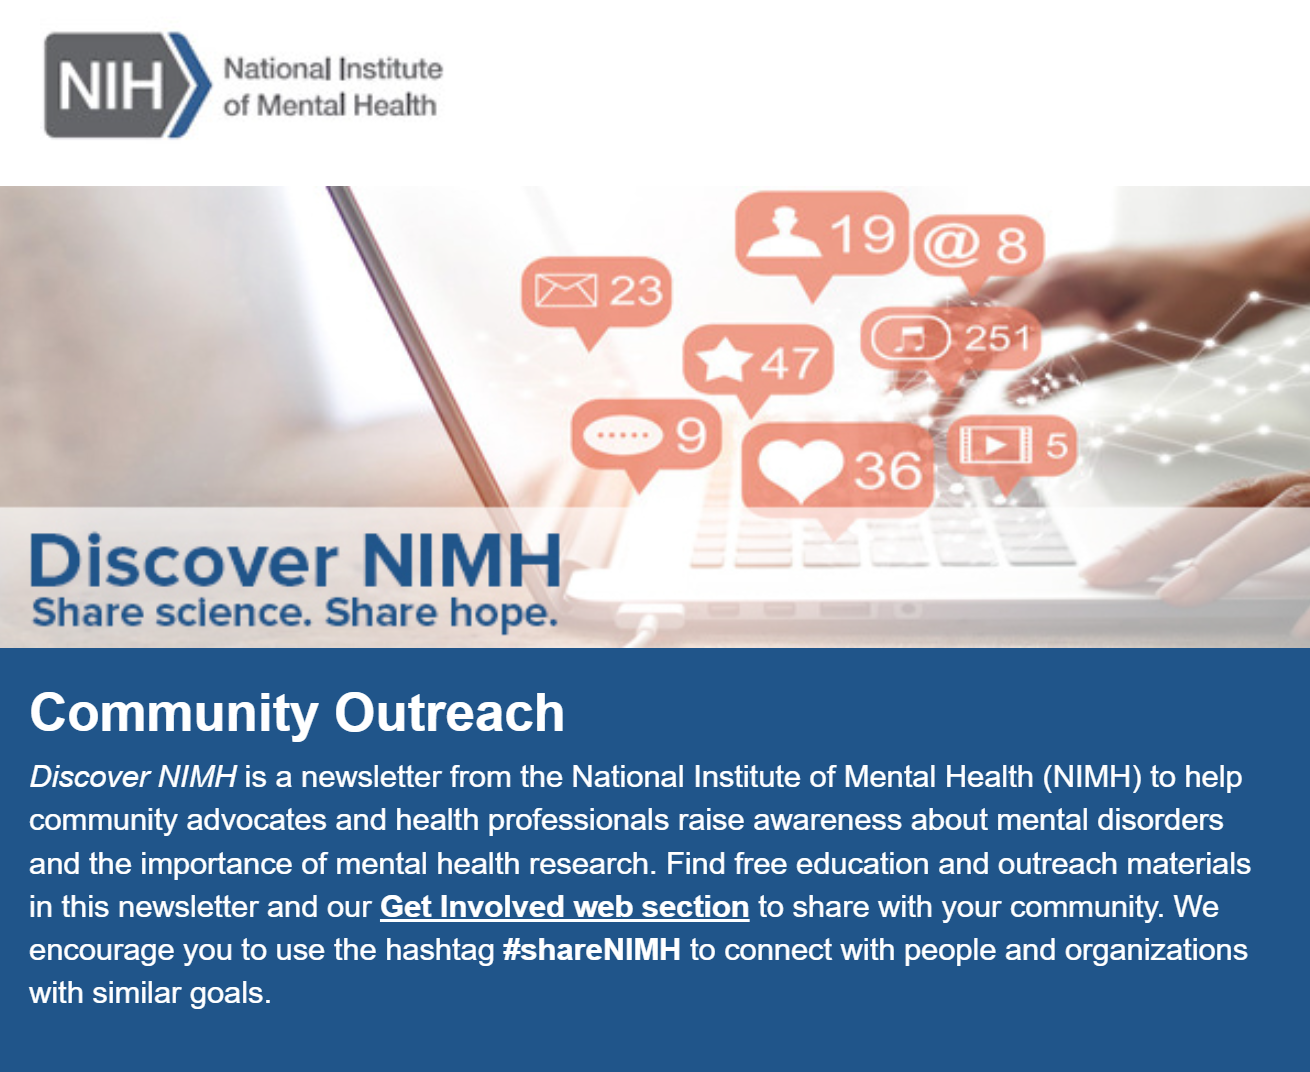 A snapshot of the 'Discover NIMH' newsletter highlighting community outreach for mental health awareness. It features the NIMH logo and social media icons representing user interactions, alongside a call to action for readers to engage with educational materials, visit the 'Get Involved' section, and use the hashtag #shareNIMH to connect with the community.